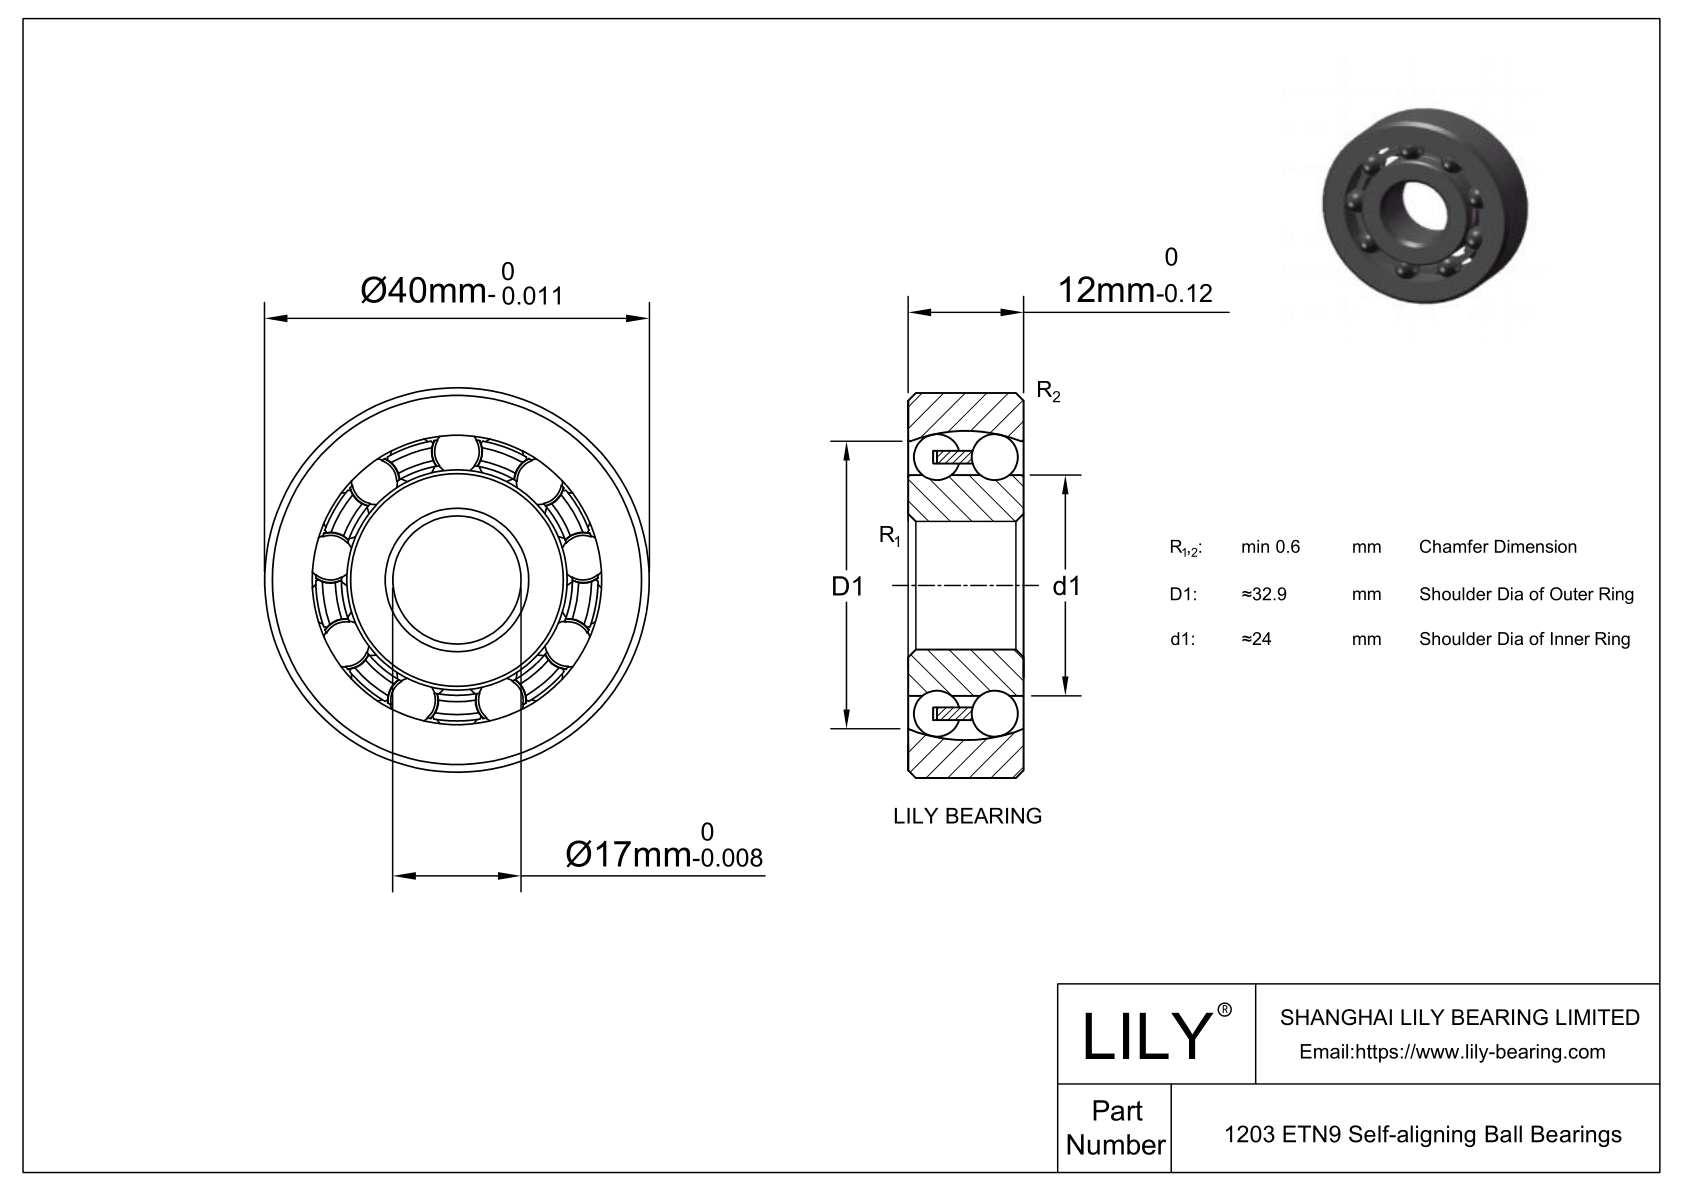 S1203 ETN9 Stainless Steel Self Aligning Ball Bearings cad drawing